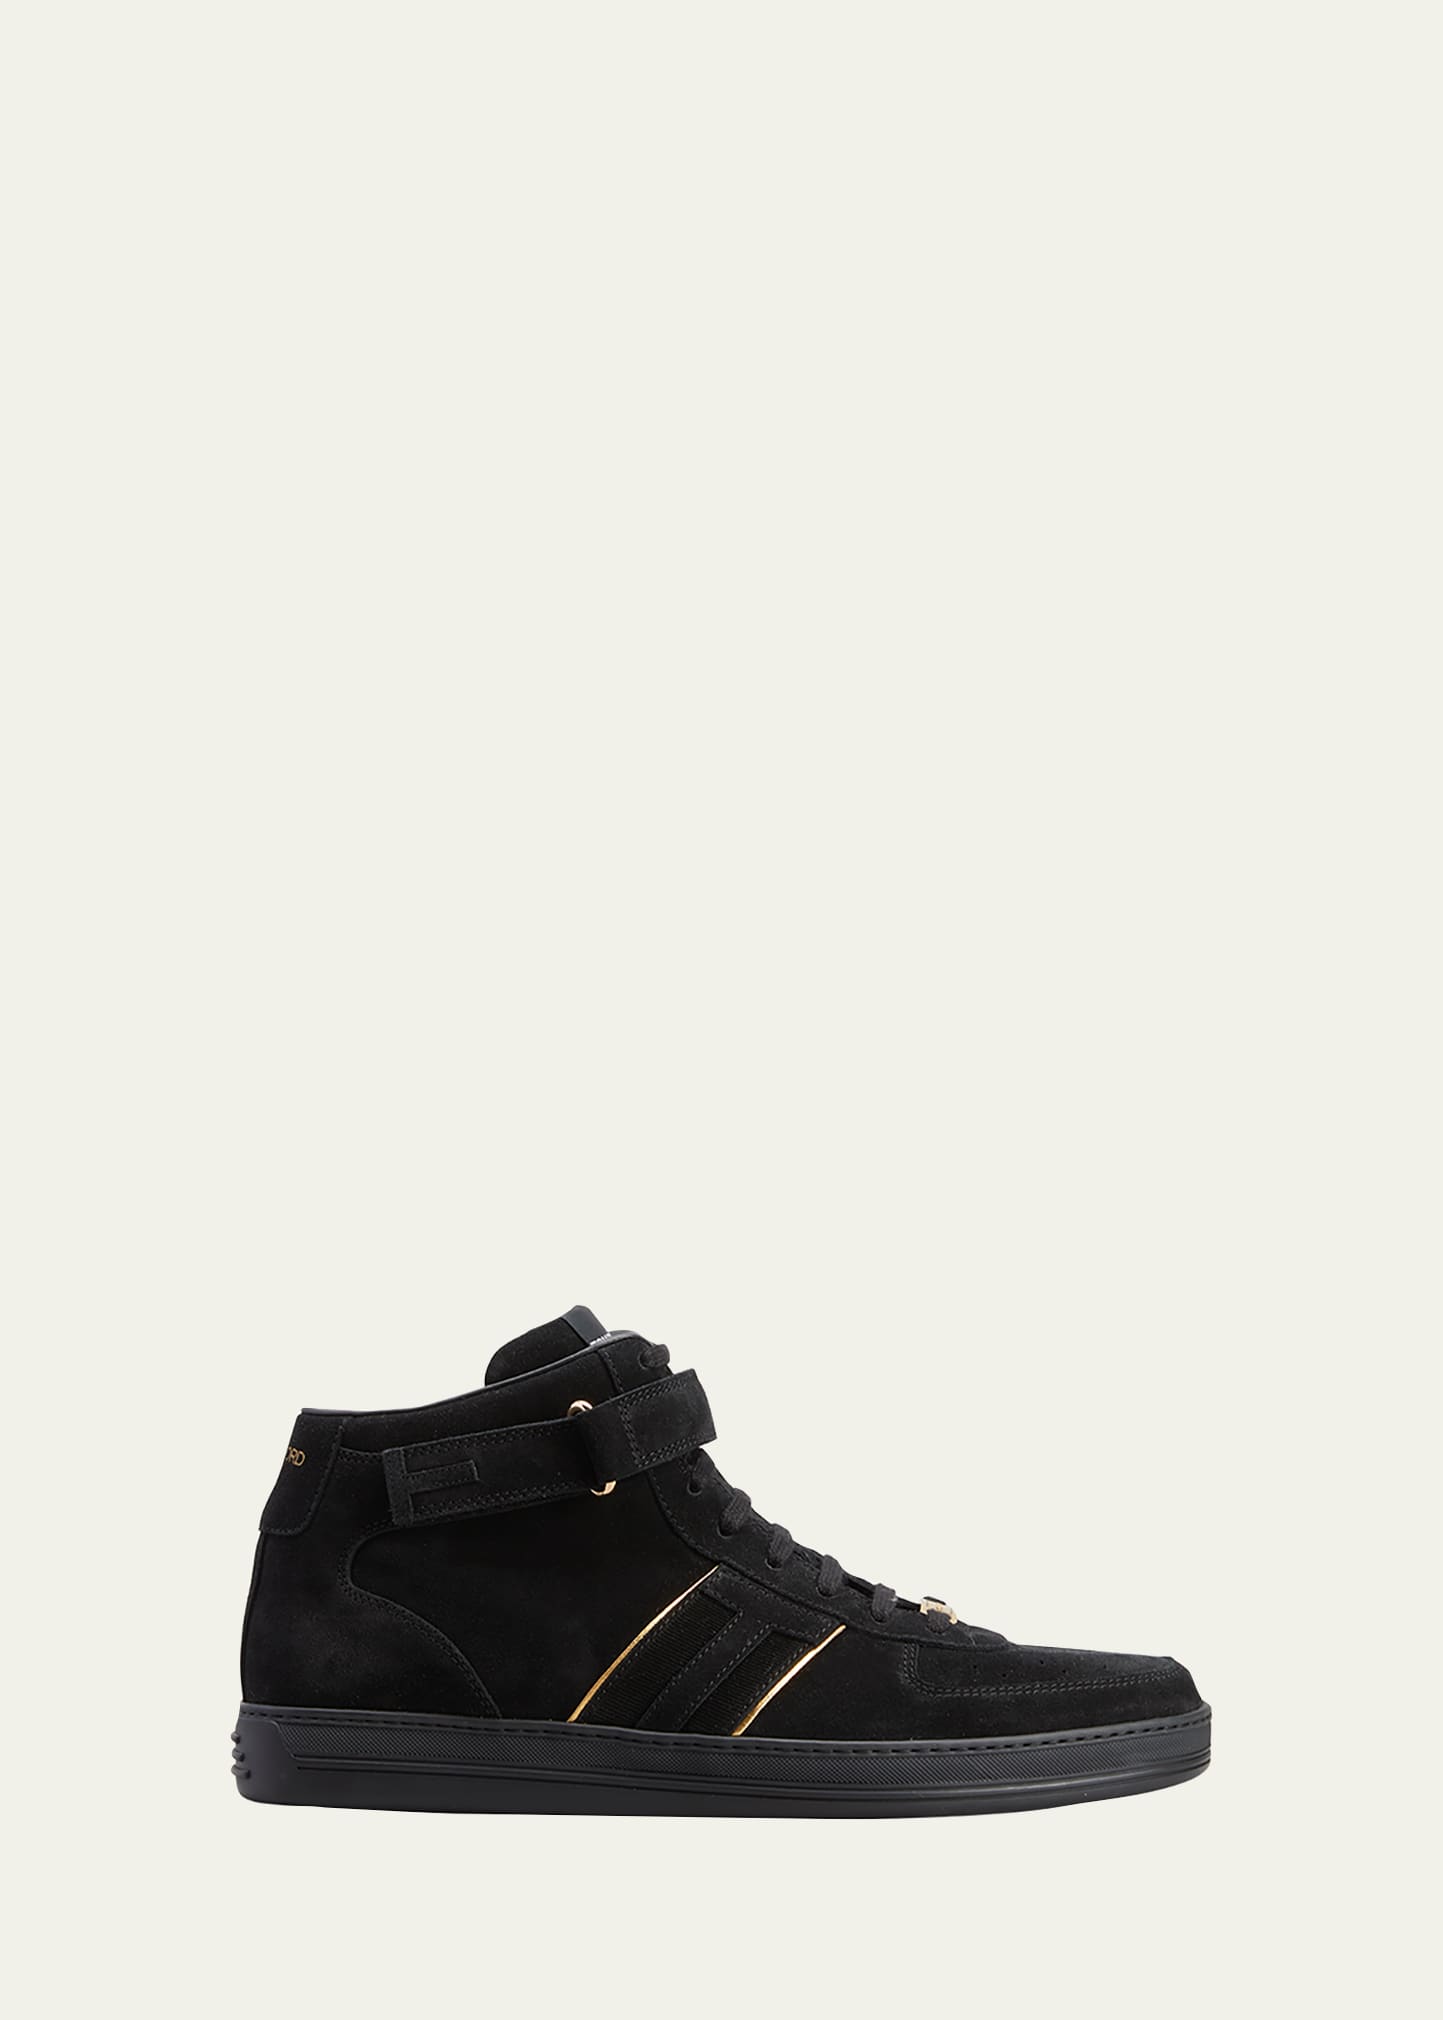 Men's Radcliffe Suede Leather High Top Sneakers